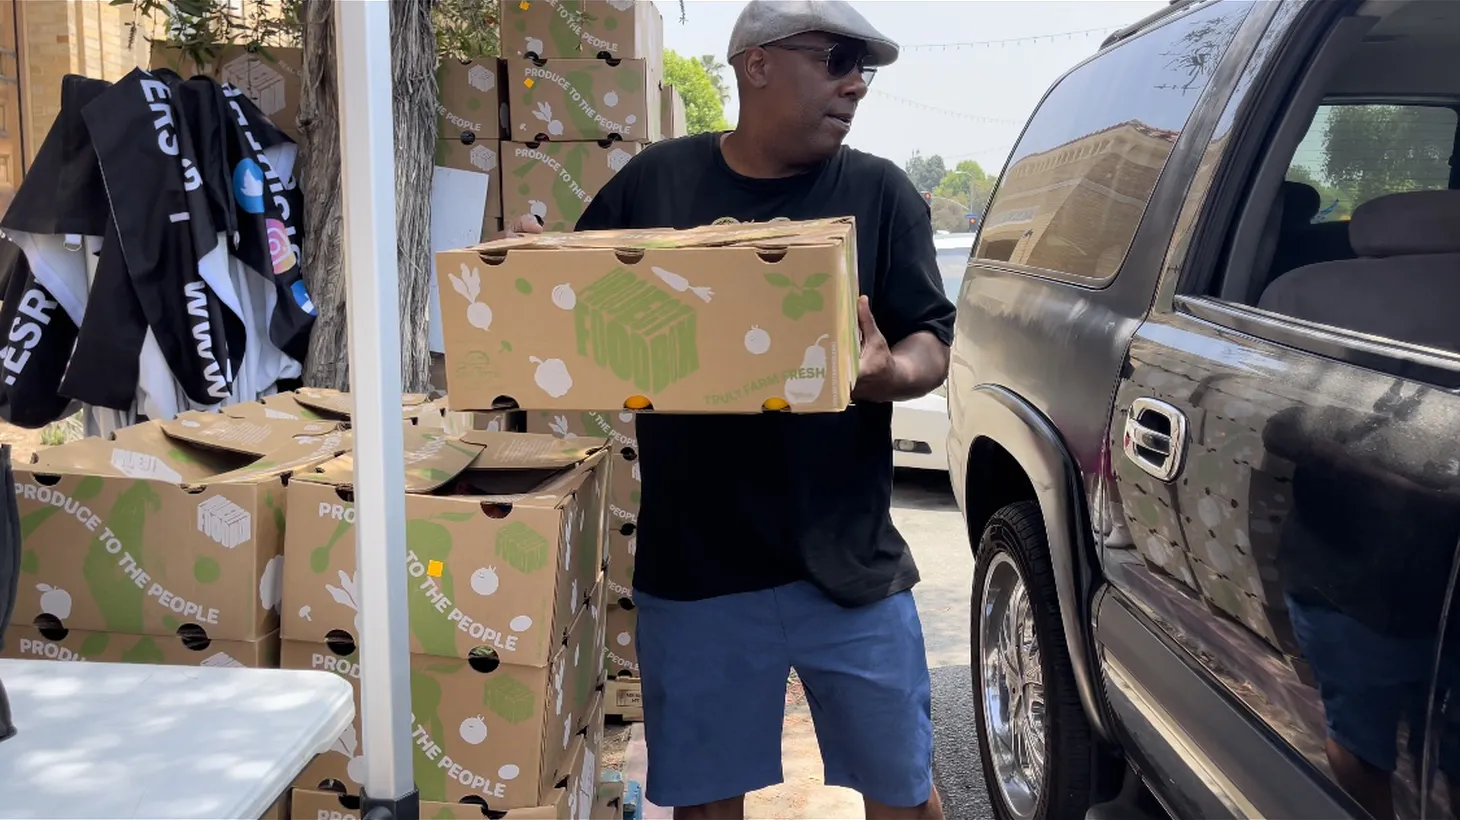 Volunteers with East Side Riders Bike Club give out boxes of food every Wednesday at their Watts location. Lately they’ve seen more demand as inflation drives up food prices. Photo courtesy of East Side Riders Bike Club President John Jones III.